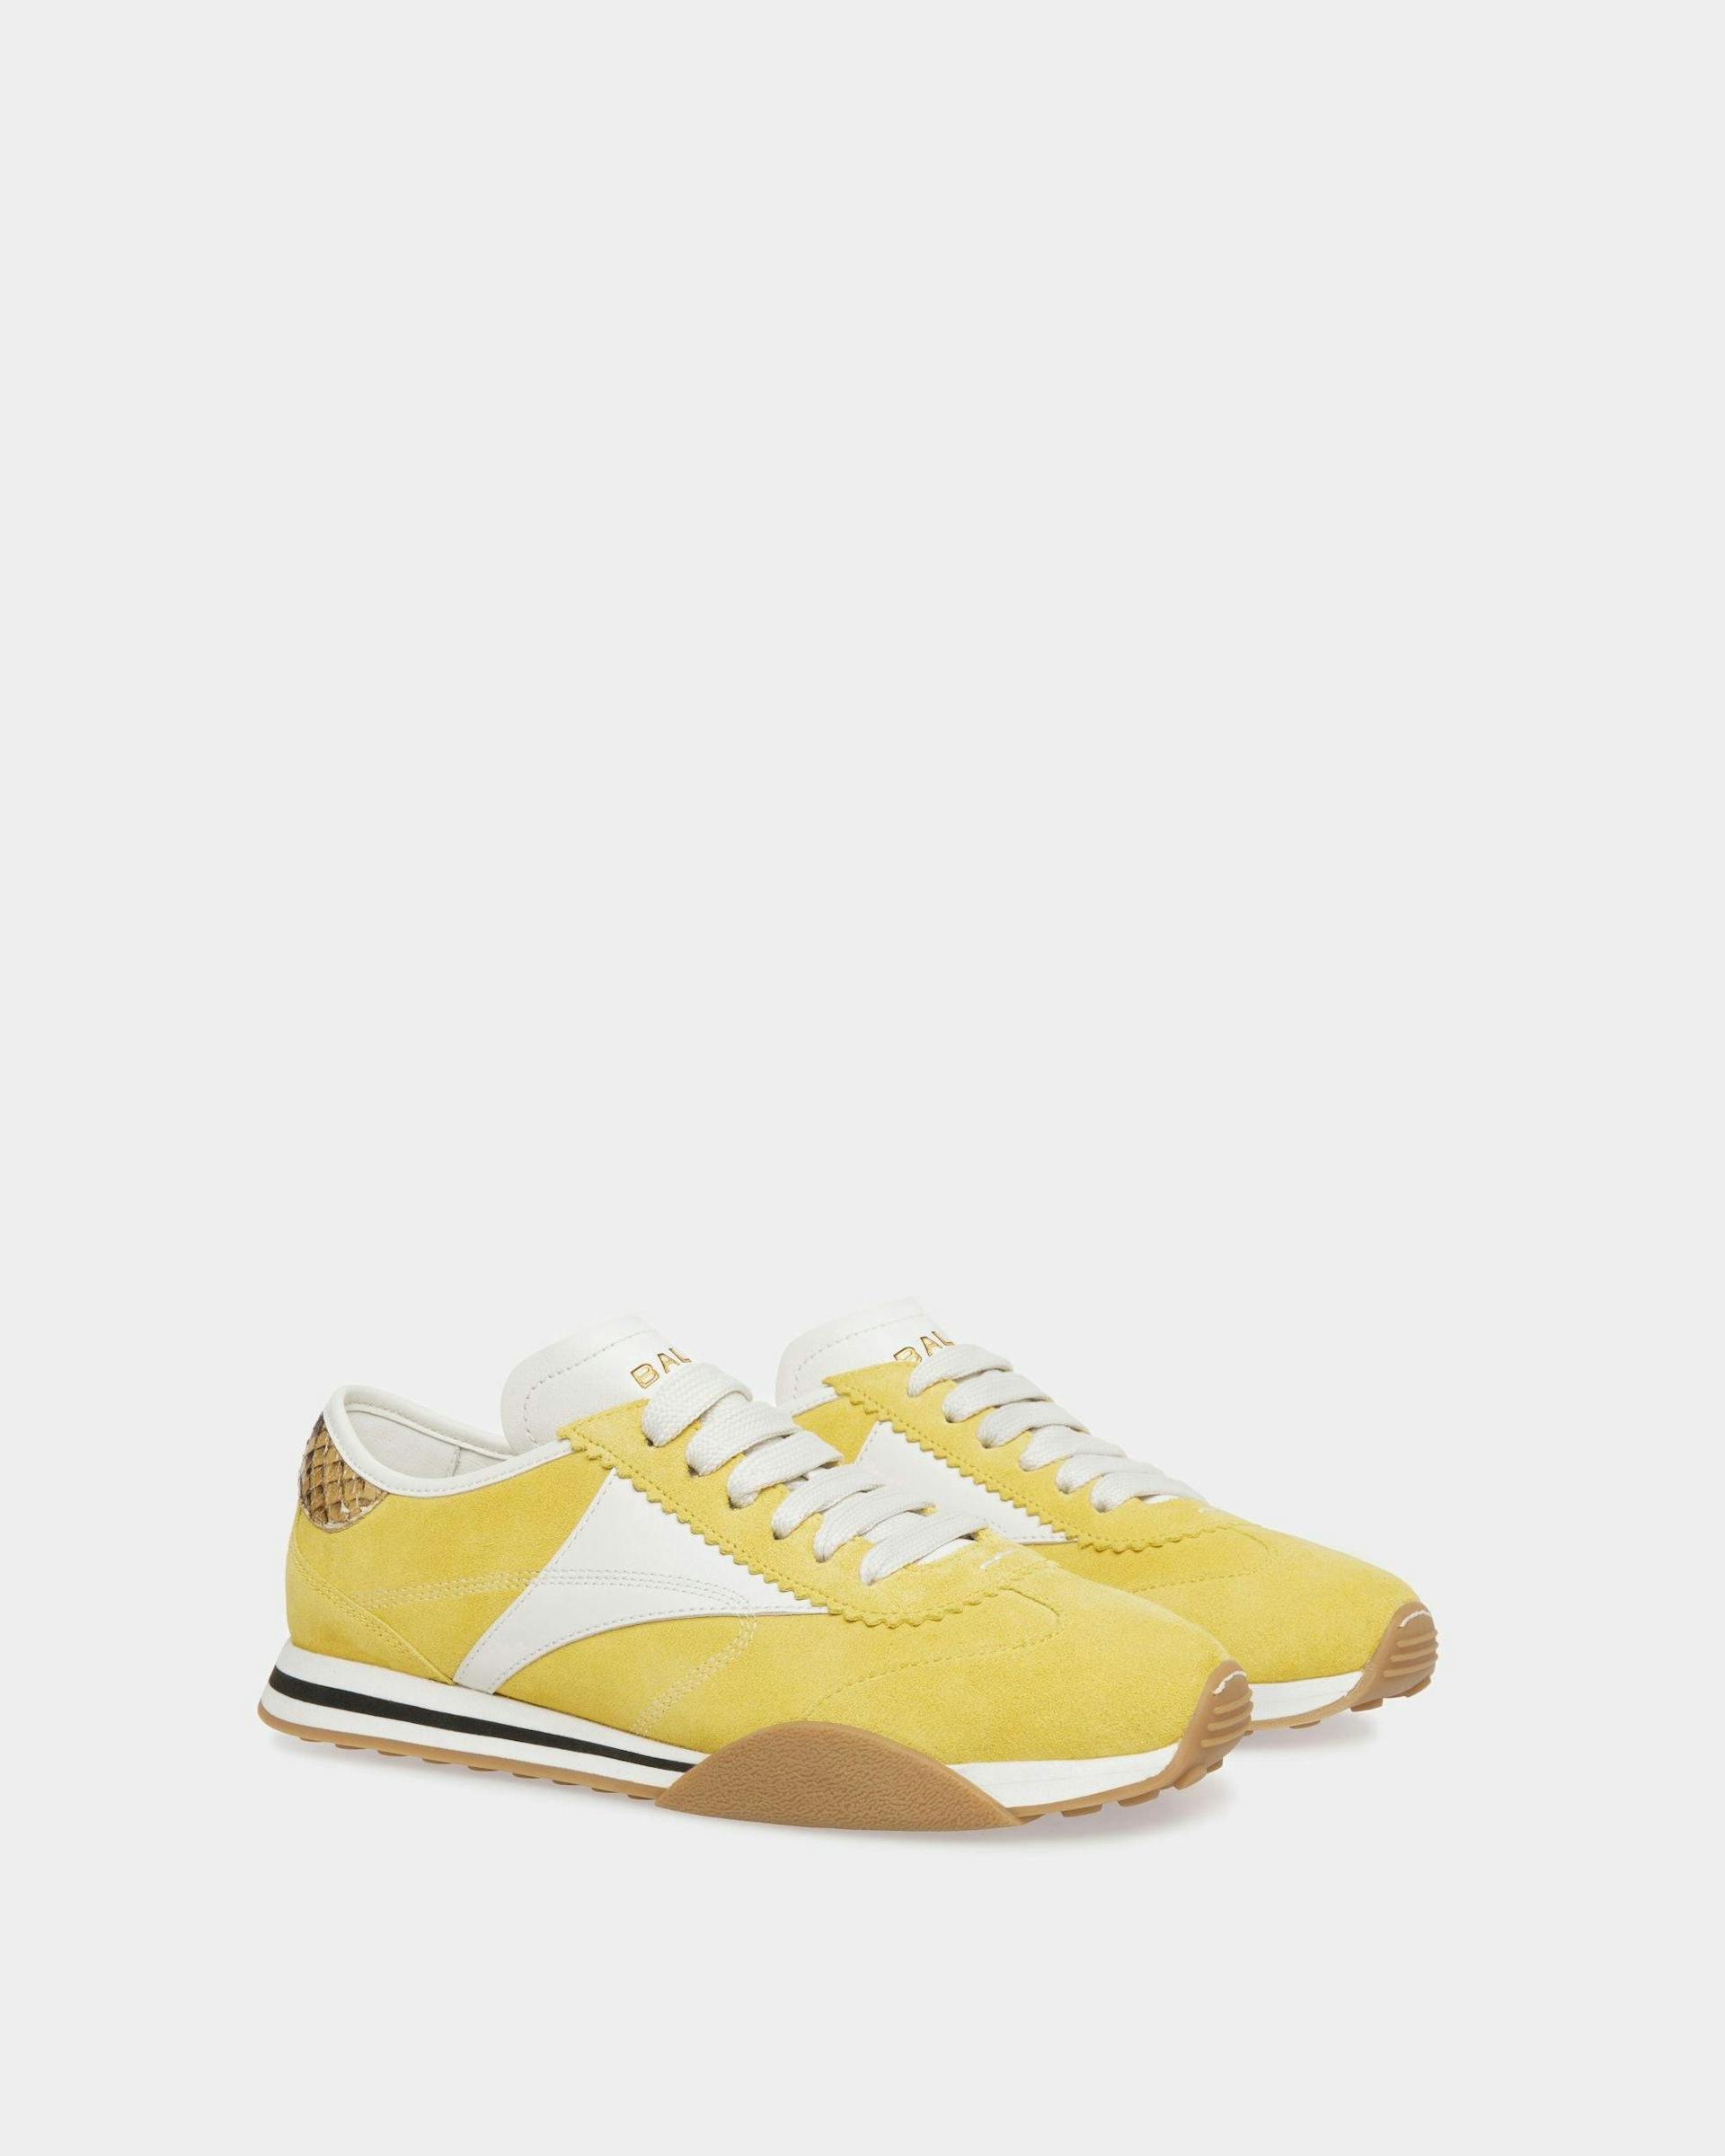 Sussex Sneakers In Yellow And White Leather - Women's - Bally - 02